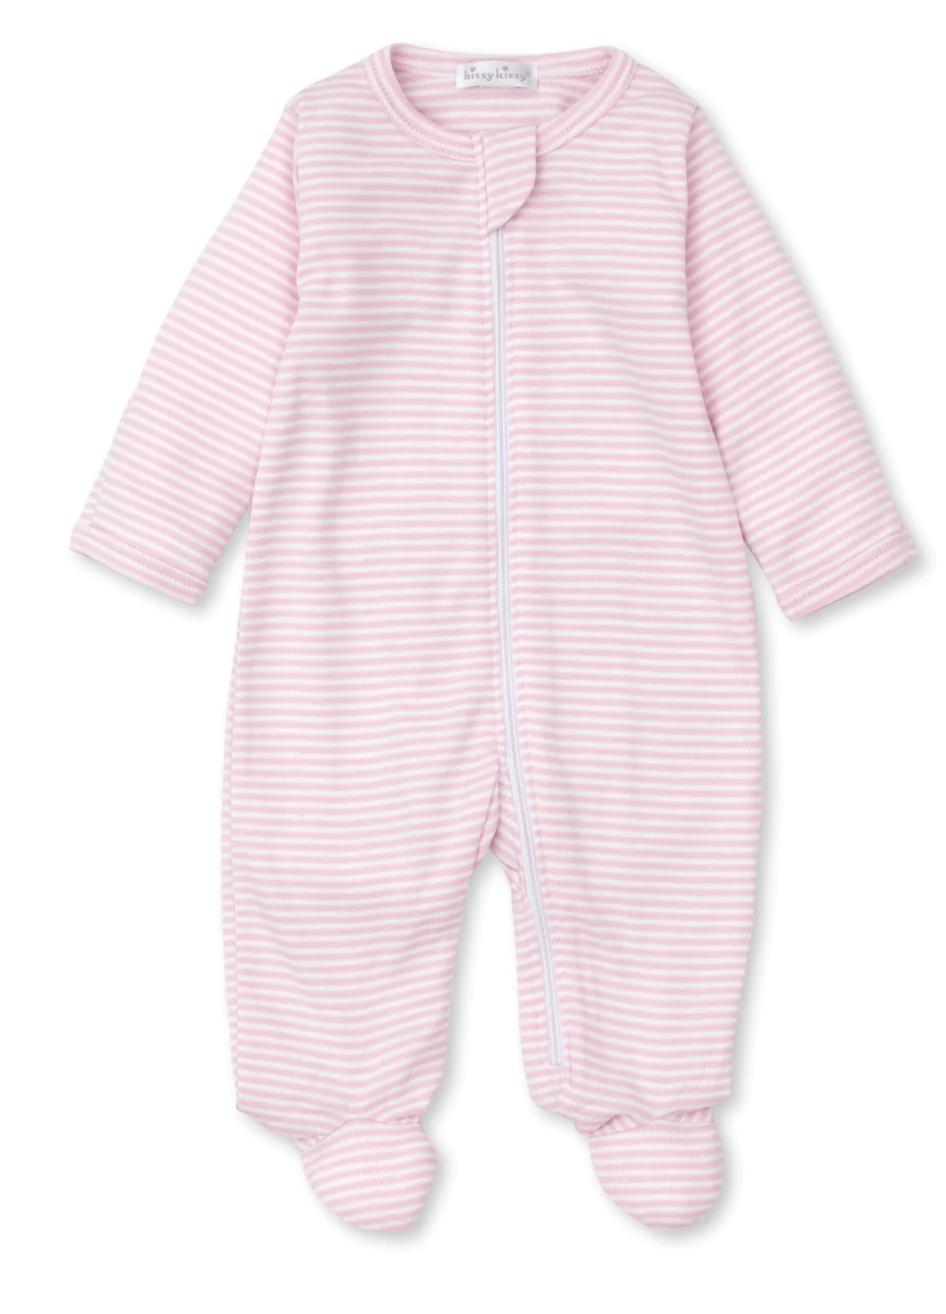 Striped Footie with Zipper- Pink